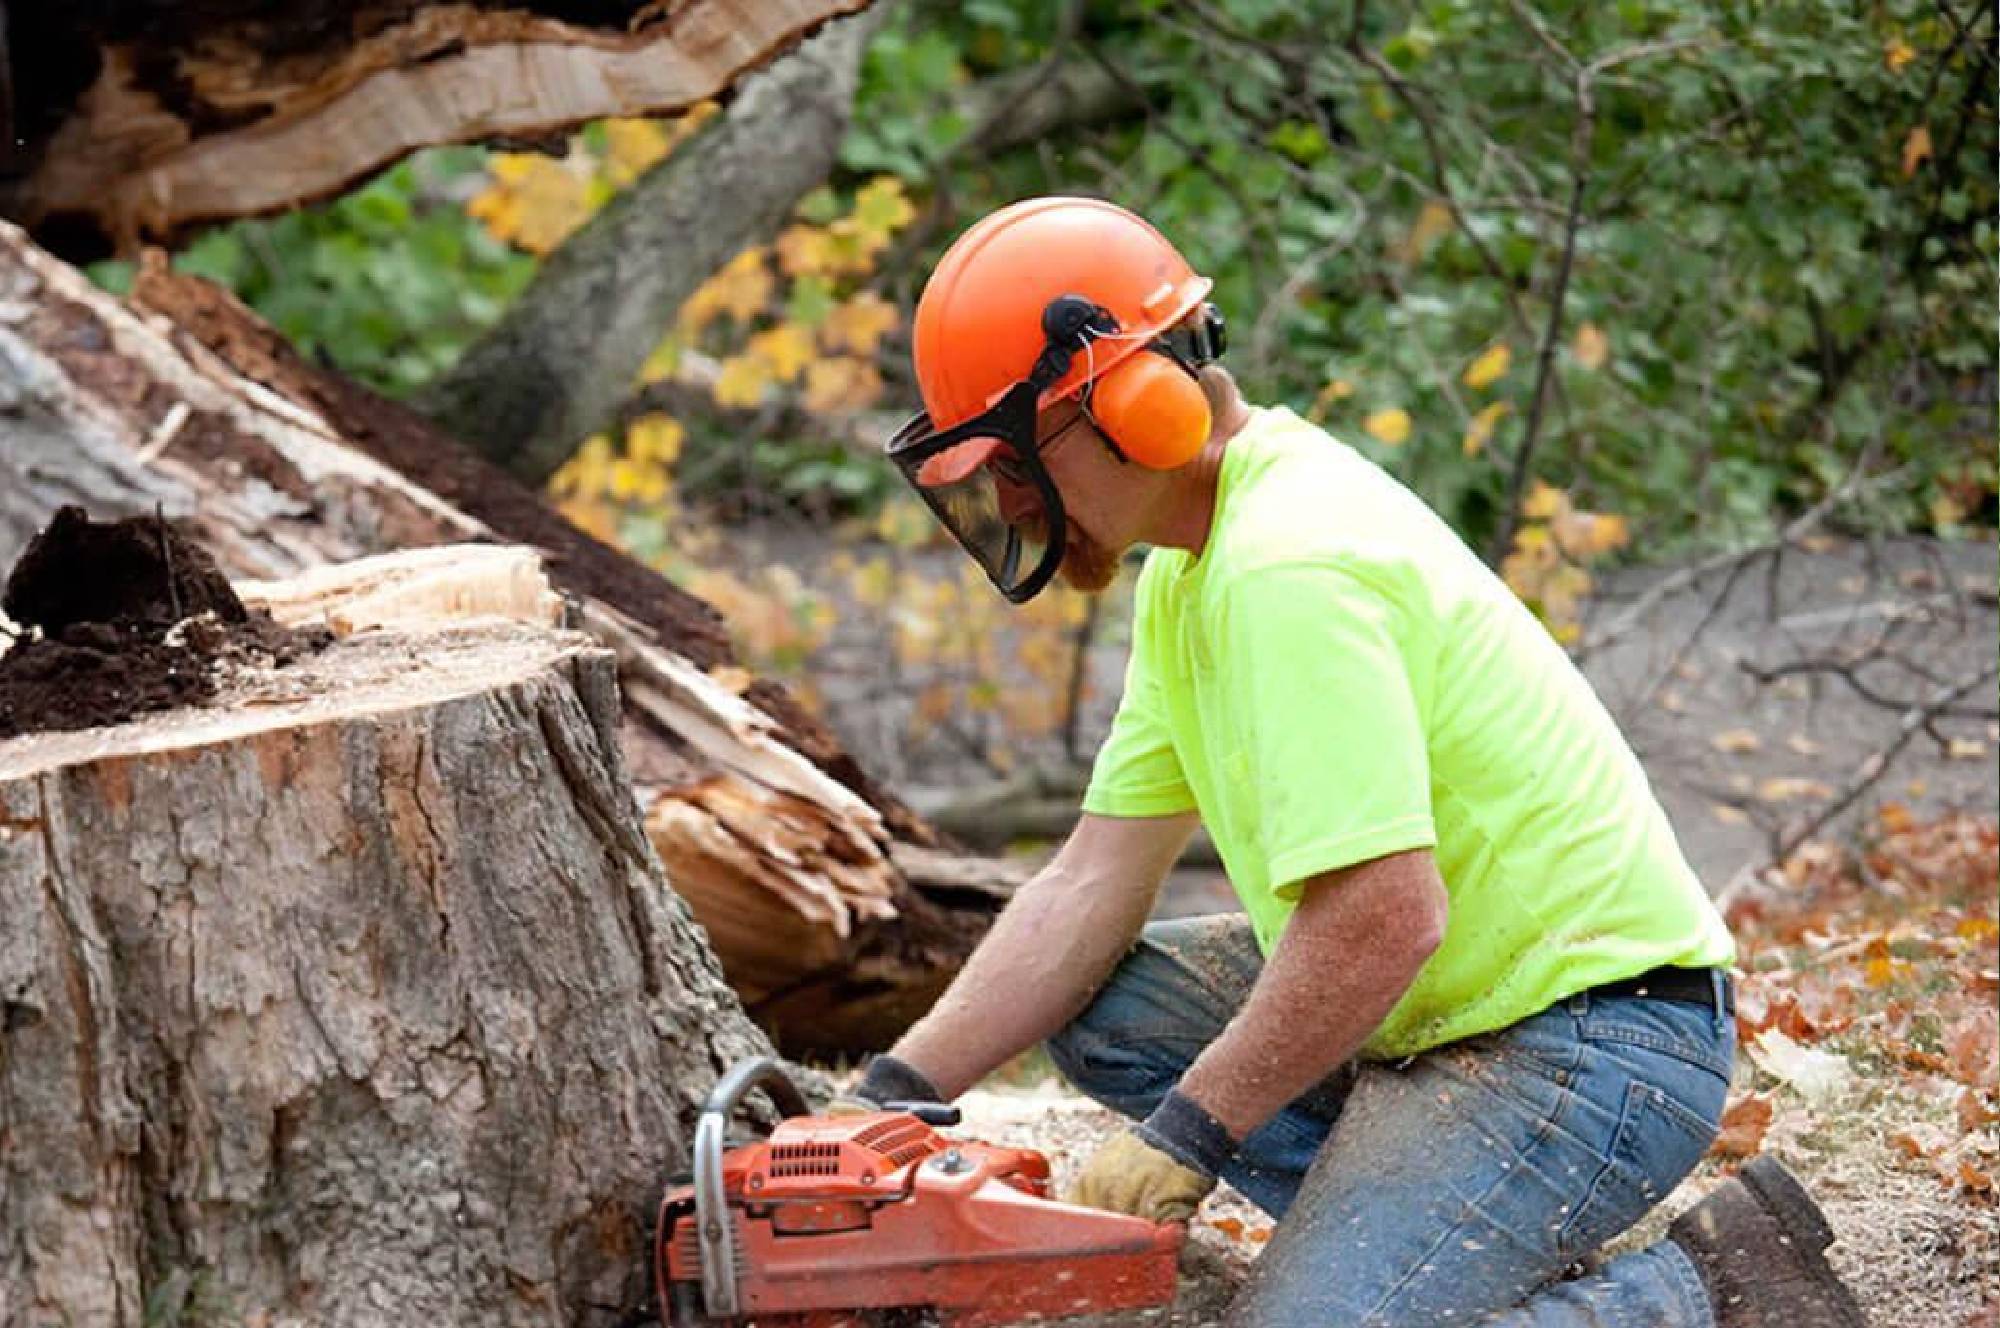 Stump Removal Services in North East Florida - Bluecollarlandservice